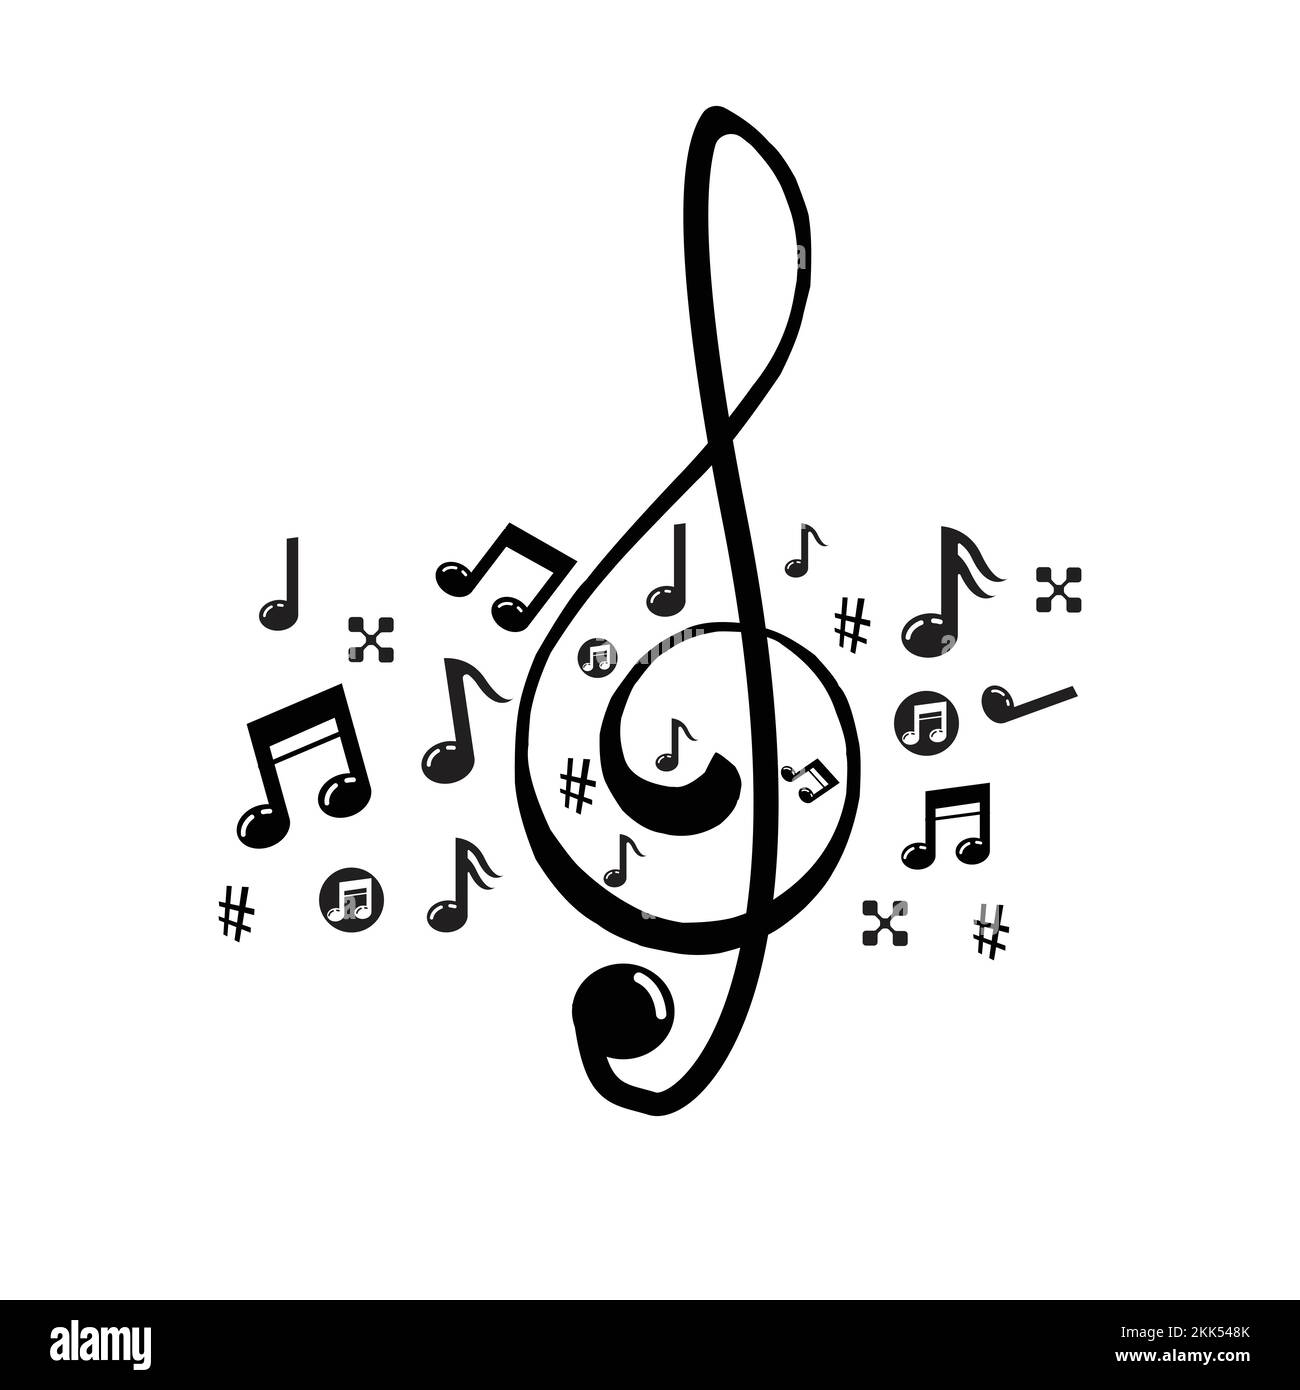 music scale logo design. music note sign or symbol. musical scale icons ...